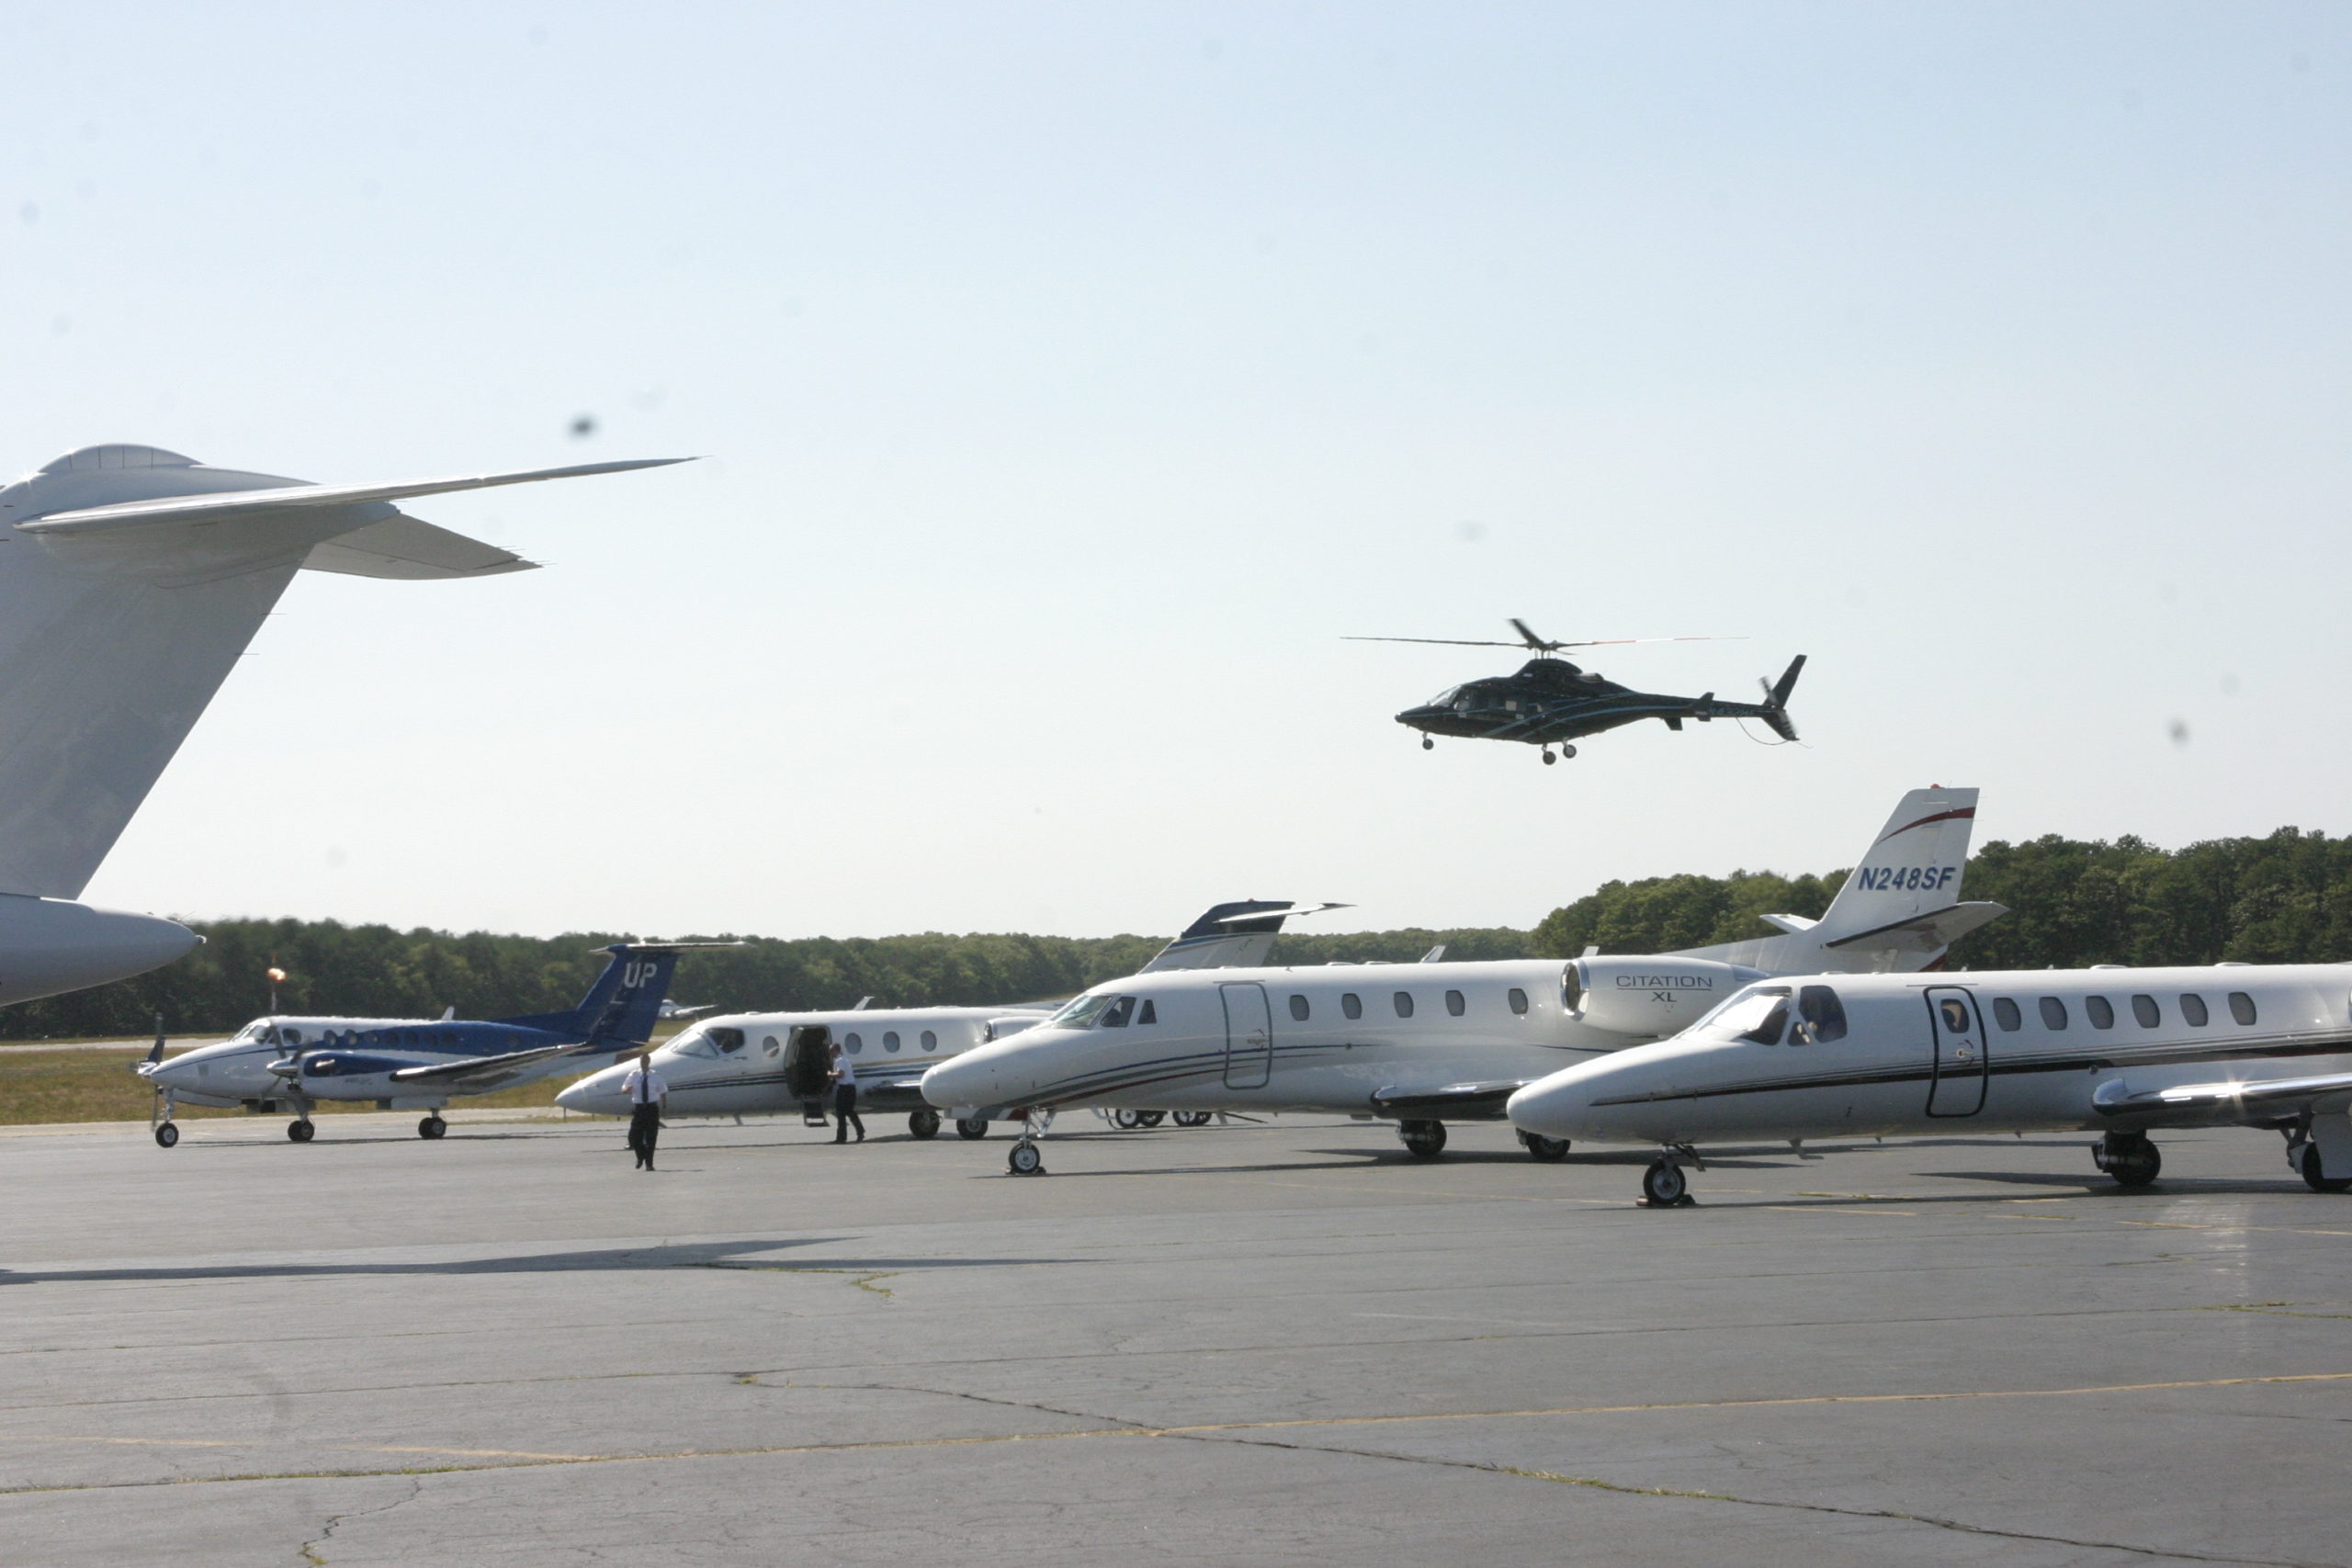 Flights by helicopters were still down, slightly, in 2021 compared to pre-pandemic levels but there were thousands more flights by jets, which could be targeted in new restrictions by East Hampton Town expected this winter.